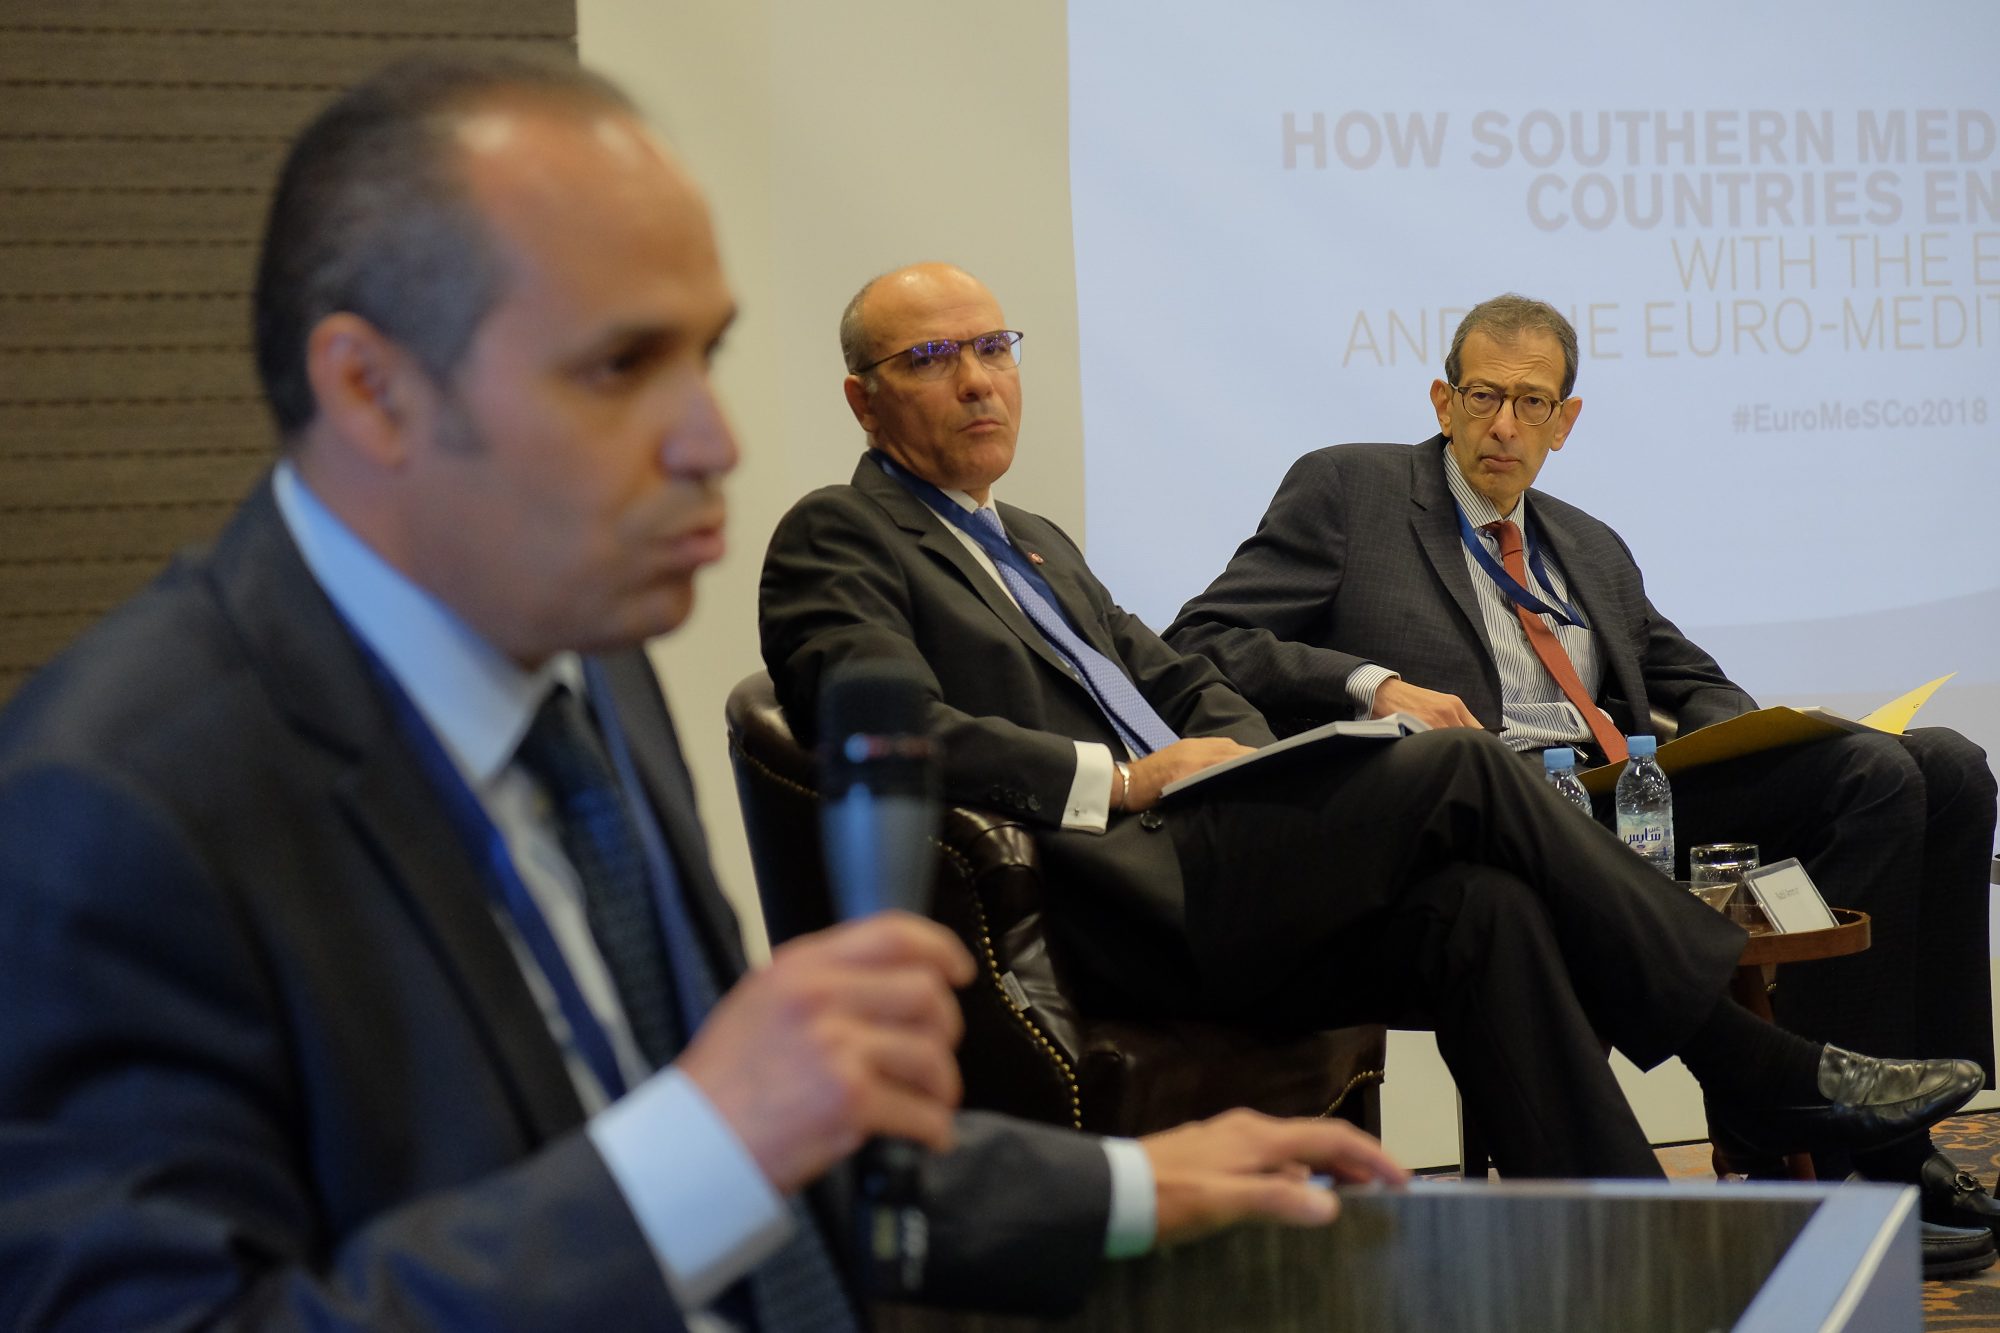 Plenary Session 2: How Southern Mediterranean Countries Engage with the EU and the EuroMediterranean?